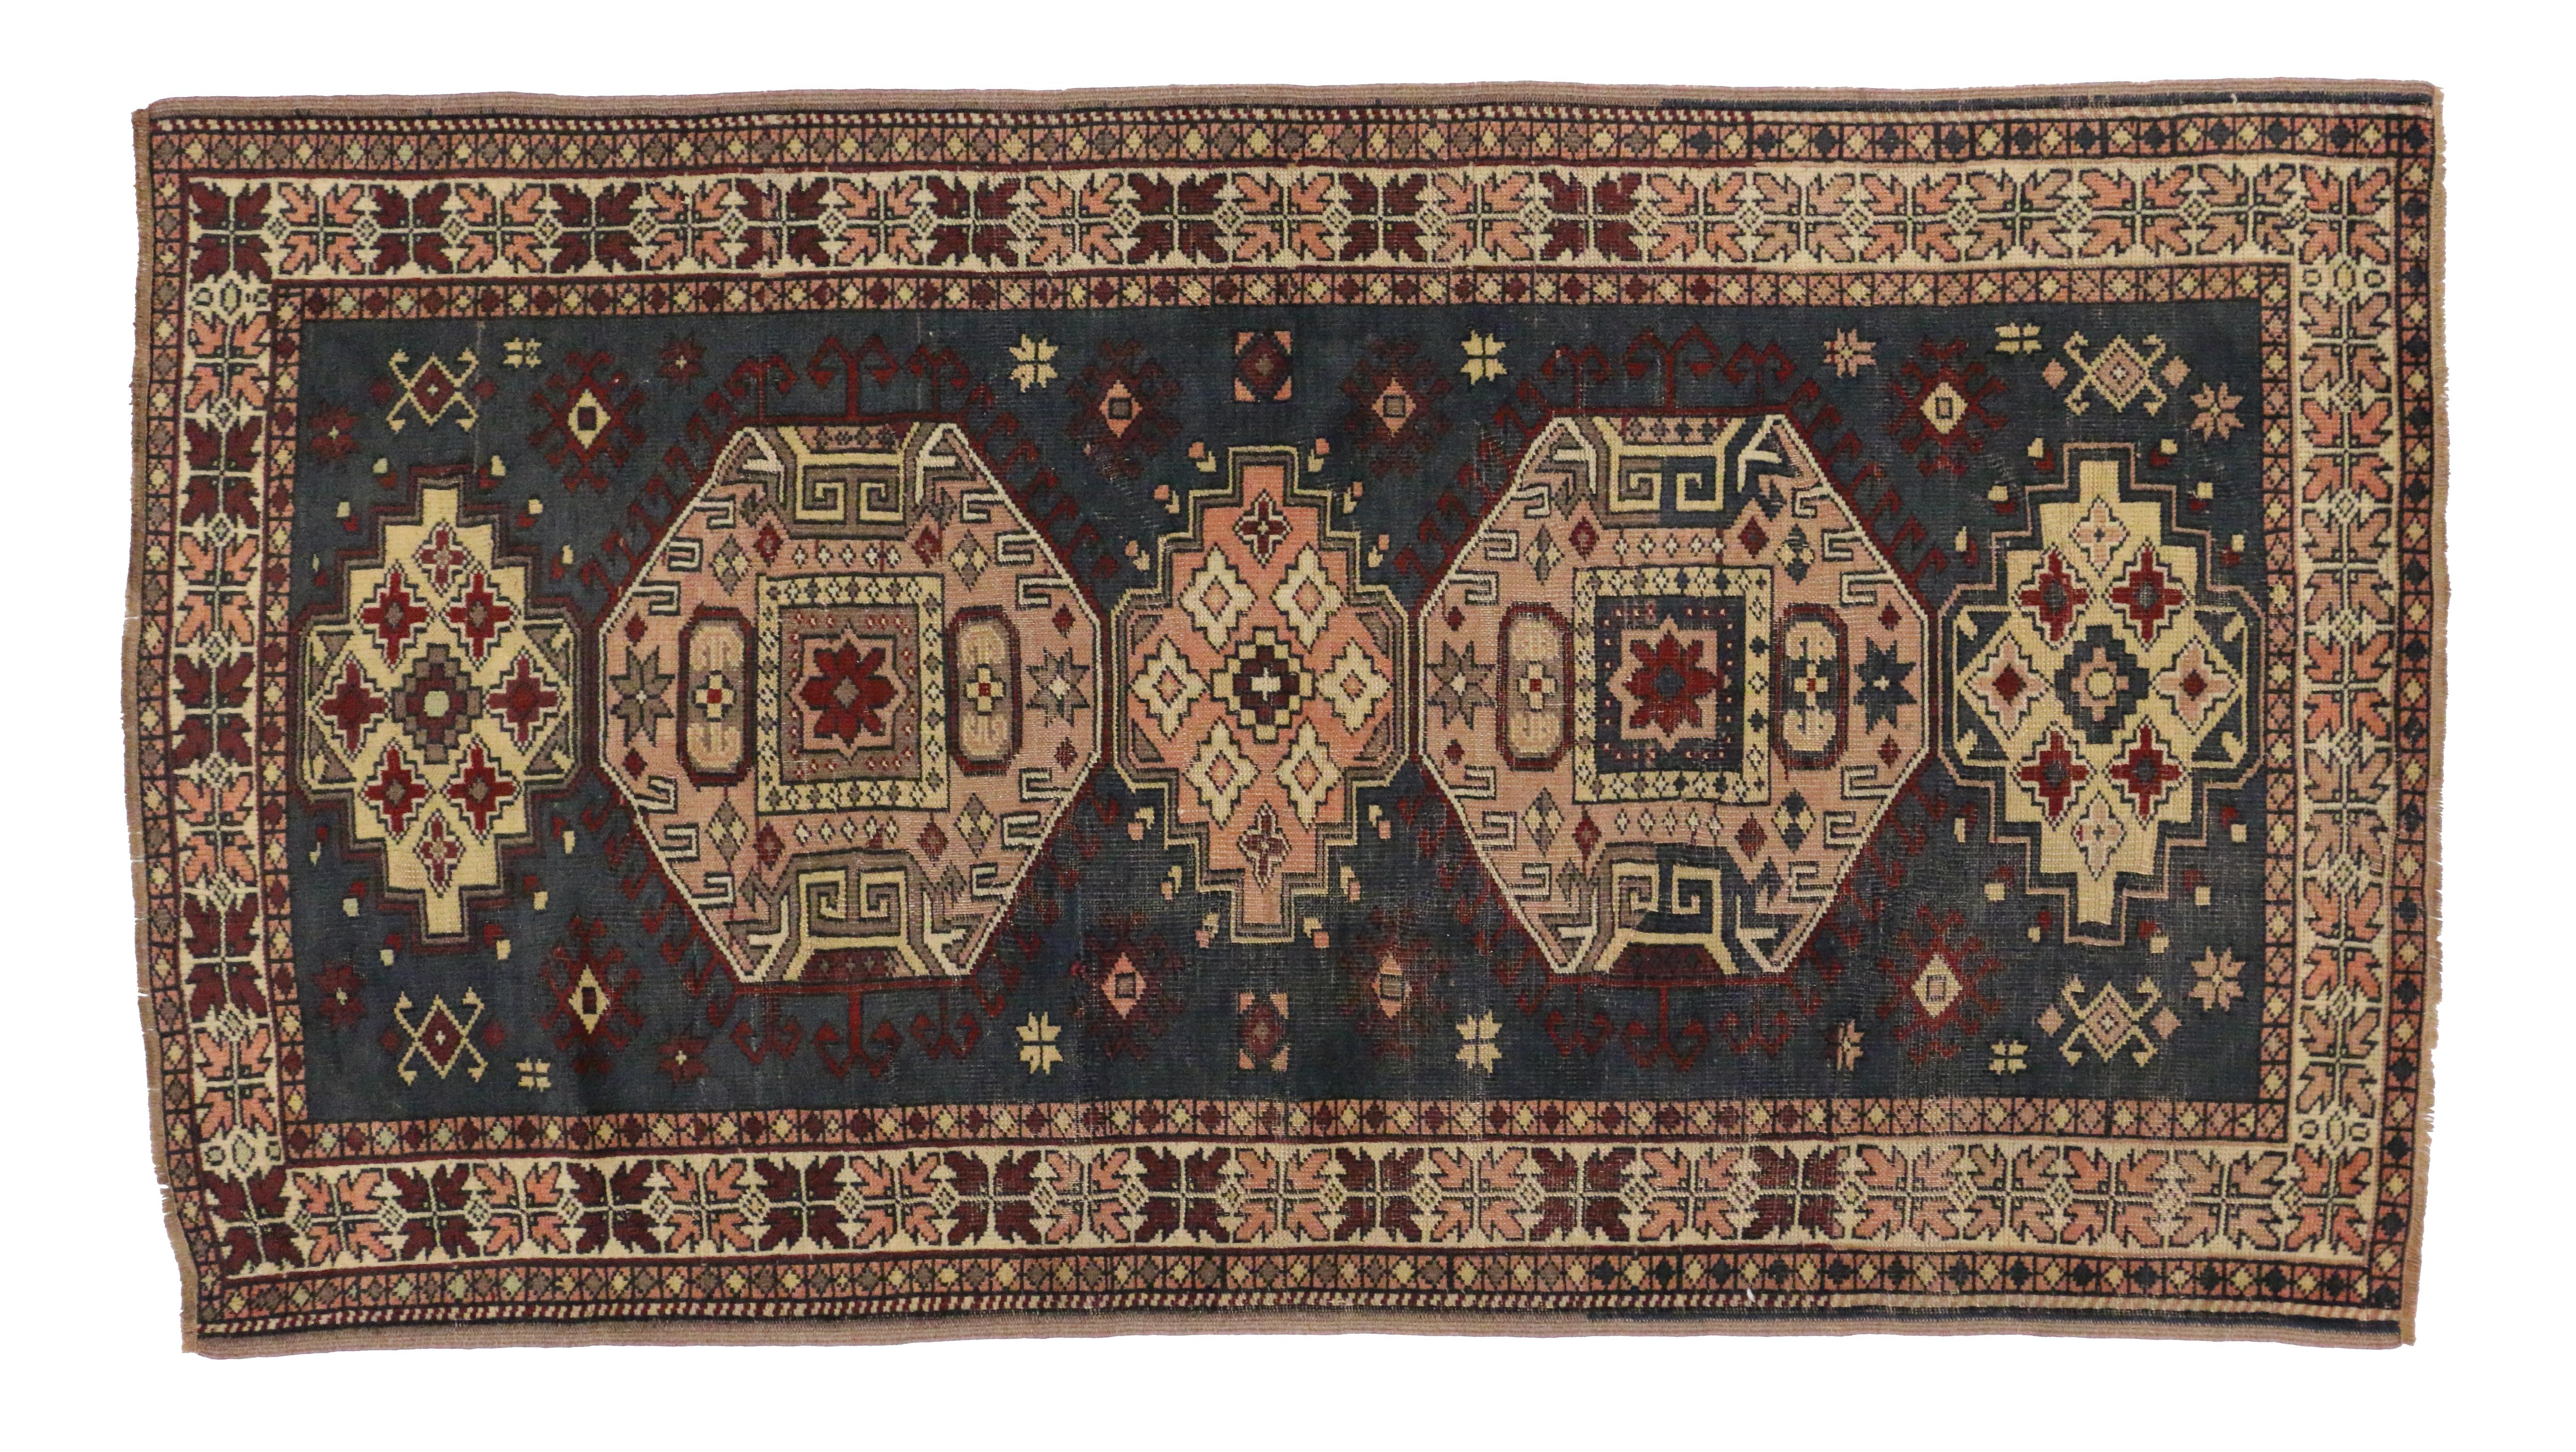 51406, vintage Turkish Oushak rug in a geometric floral medallion pattern. This opulent hand-knotted wool vintage Oushak rug features stacked geometric medallions dotted with stylized flowers and Turkish tribal motifs on a dark charcoal blue-gray